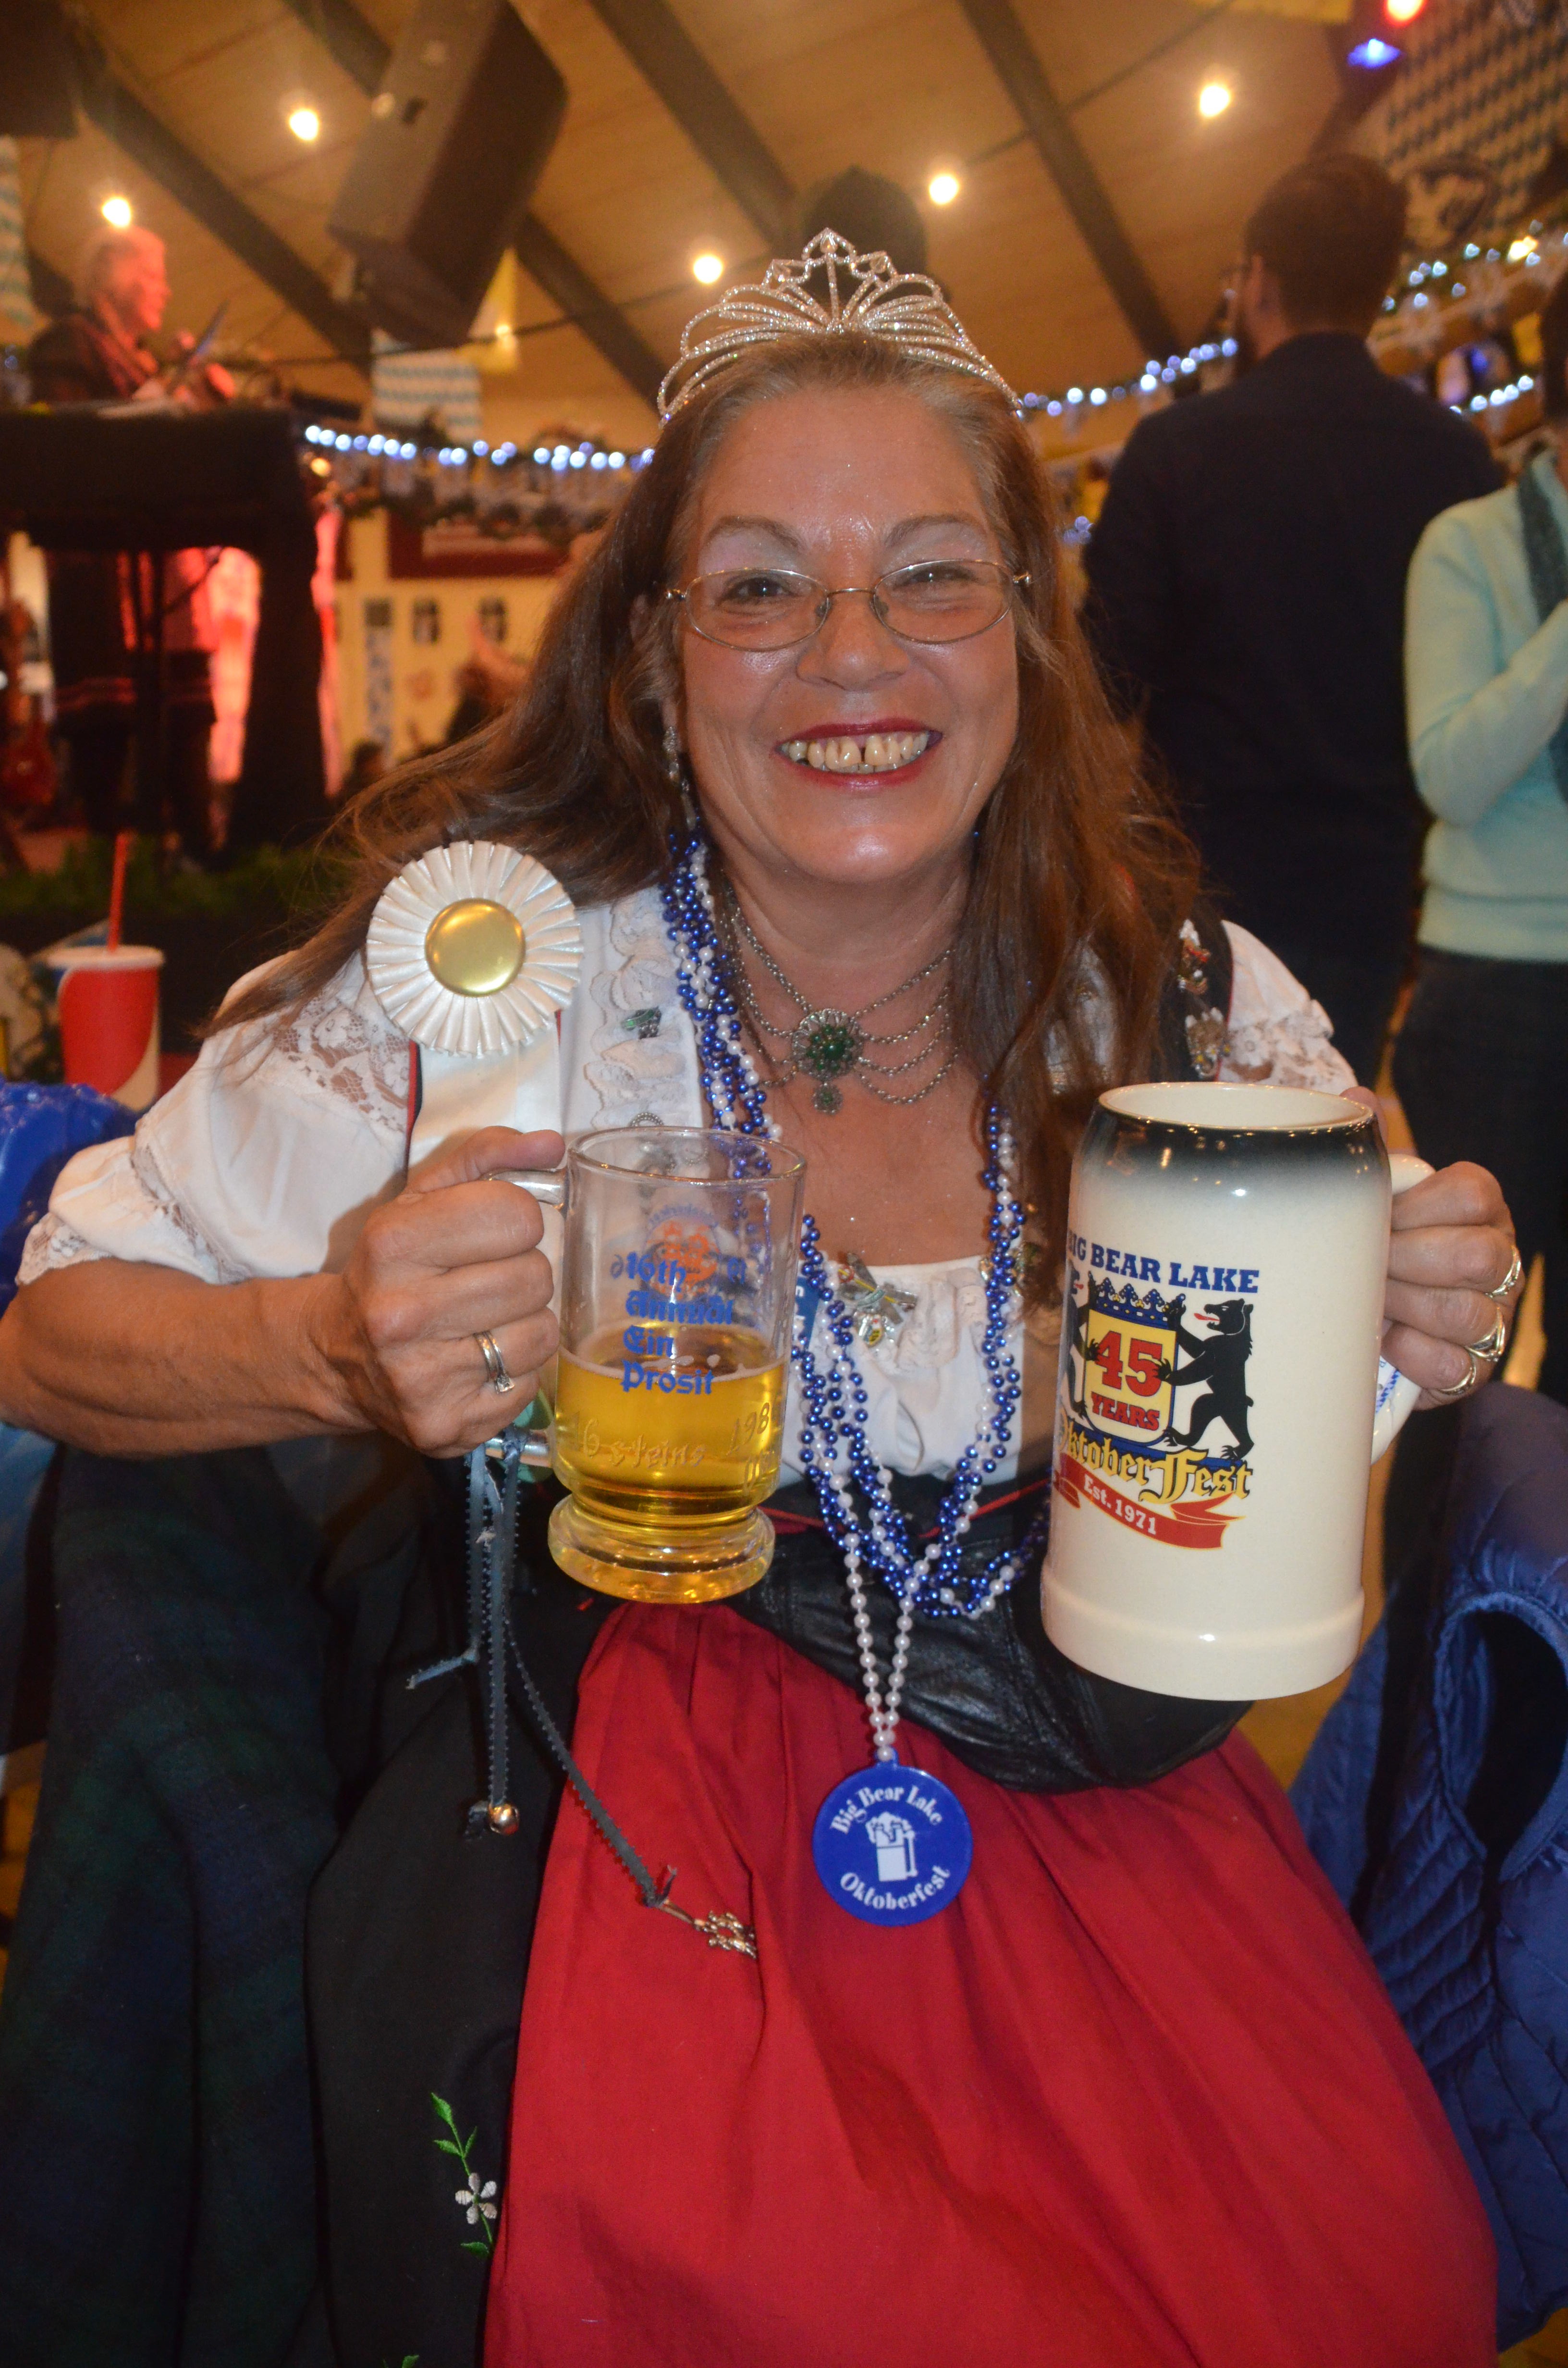 Big Bear resident Terry Vazquez won the title of Oktoberfest Queen in 1986 when she carried 16 beer steins weighing 5 pounds each 30 feet across the convention center floor.